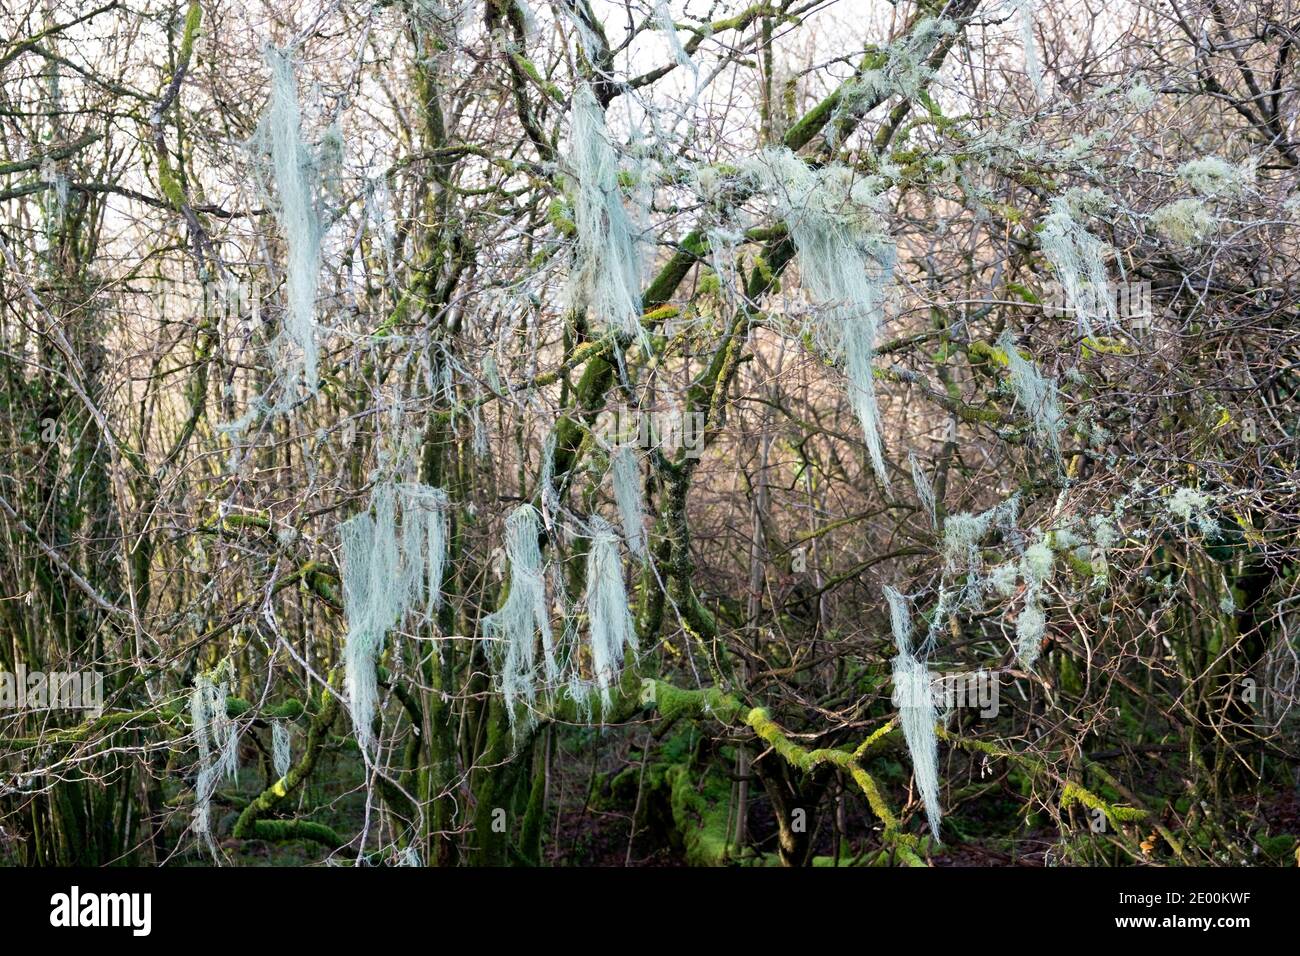 Usnea filipendula or dasopoga (dasypoga) growing on branches of a tree in boggy area of woodland in winter Carmarthenshire Wales UK 2020 KATHY DEWITT Stock Photo